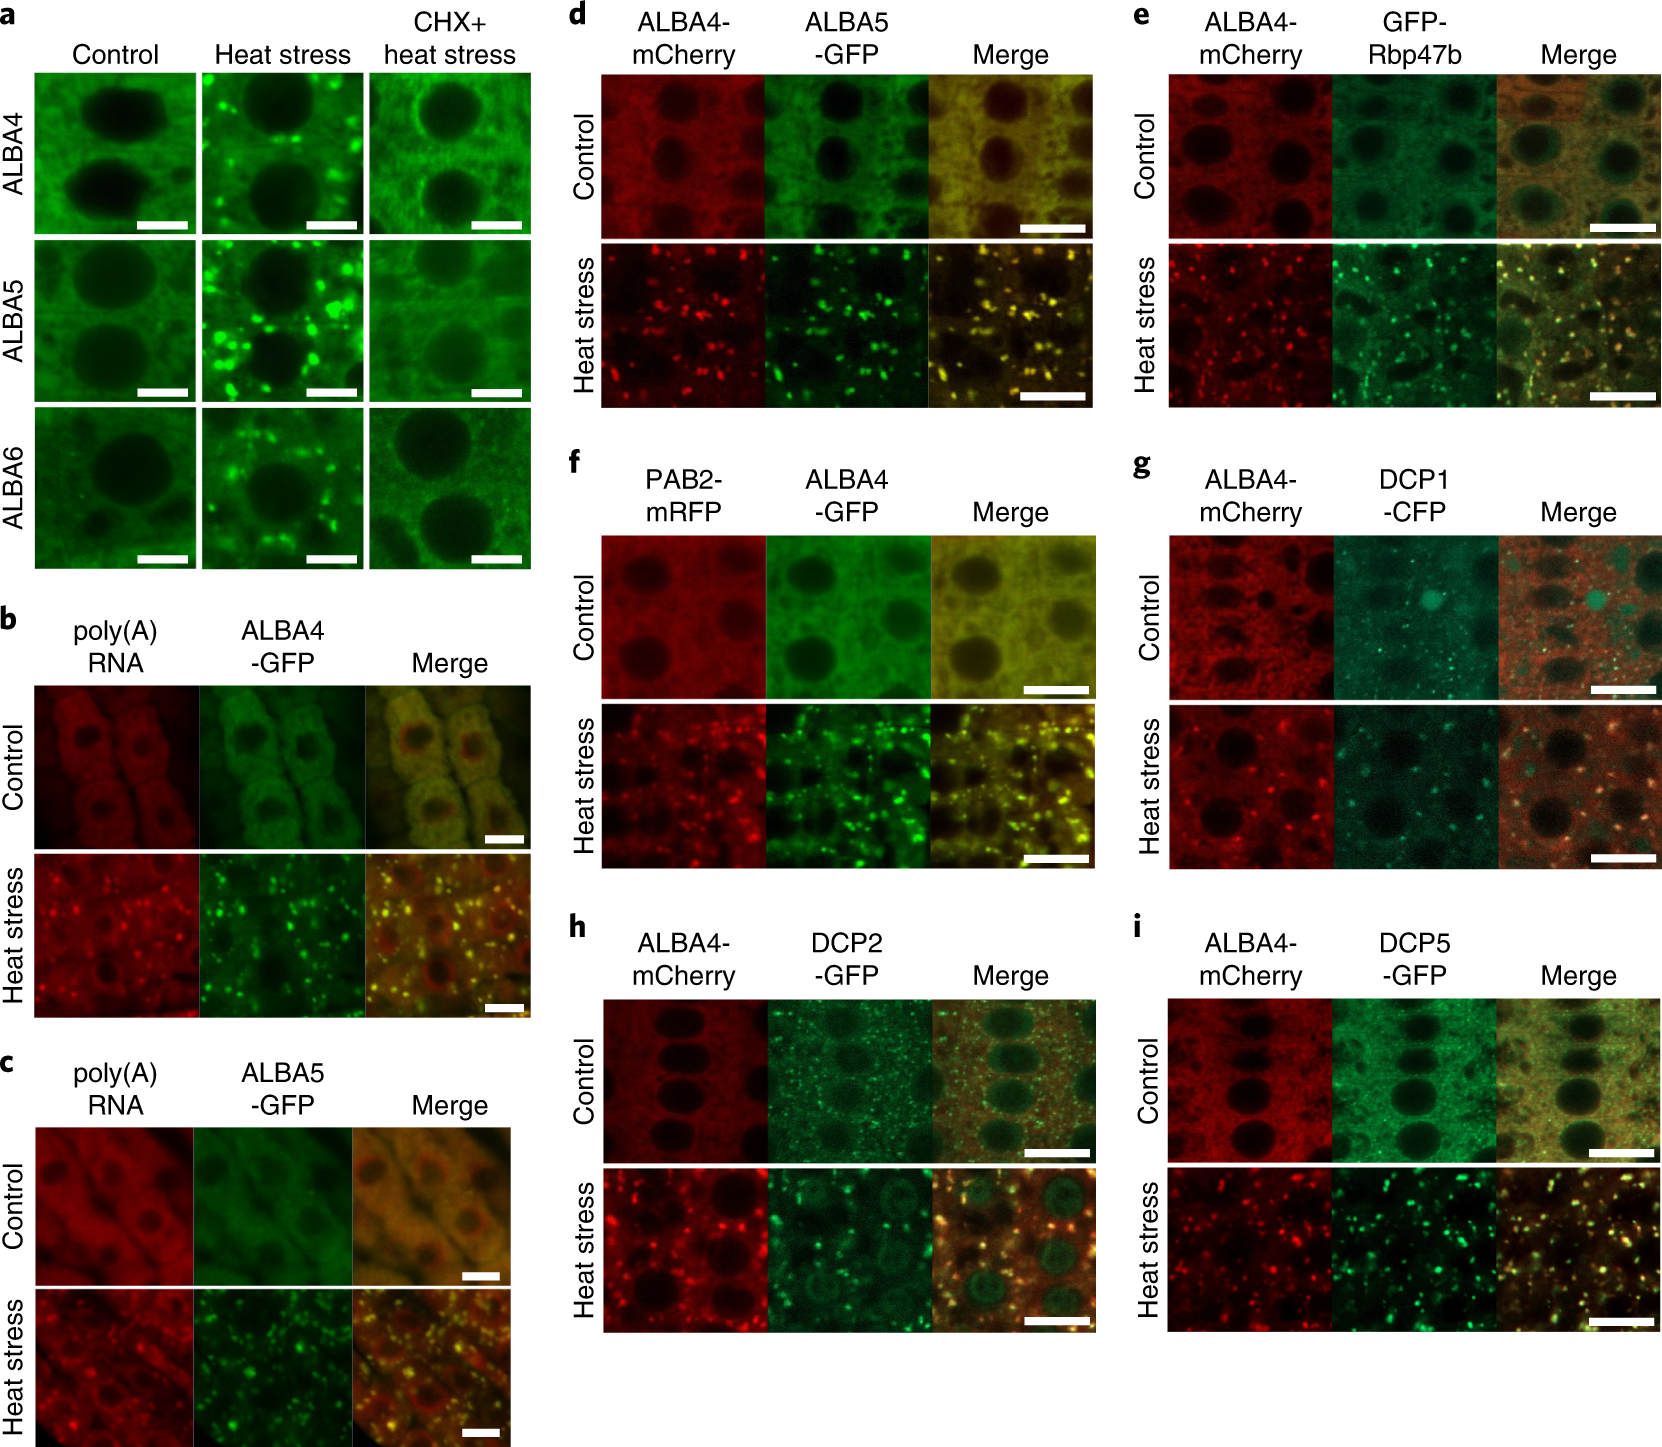 ALBA proteins confer thermotolerance through stabilizing HSF messenger RNAs  in cytoplasmic granules | Nature Plants